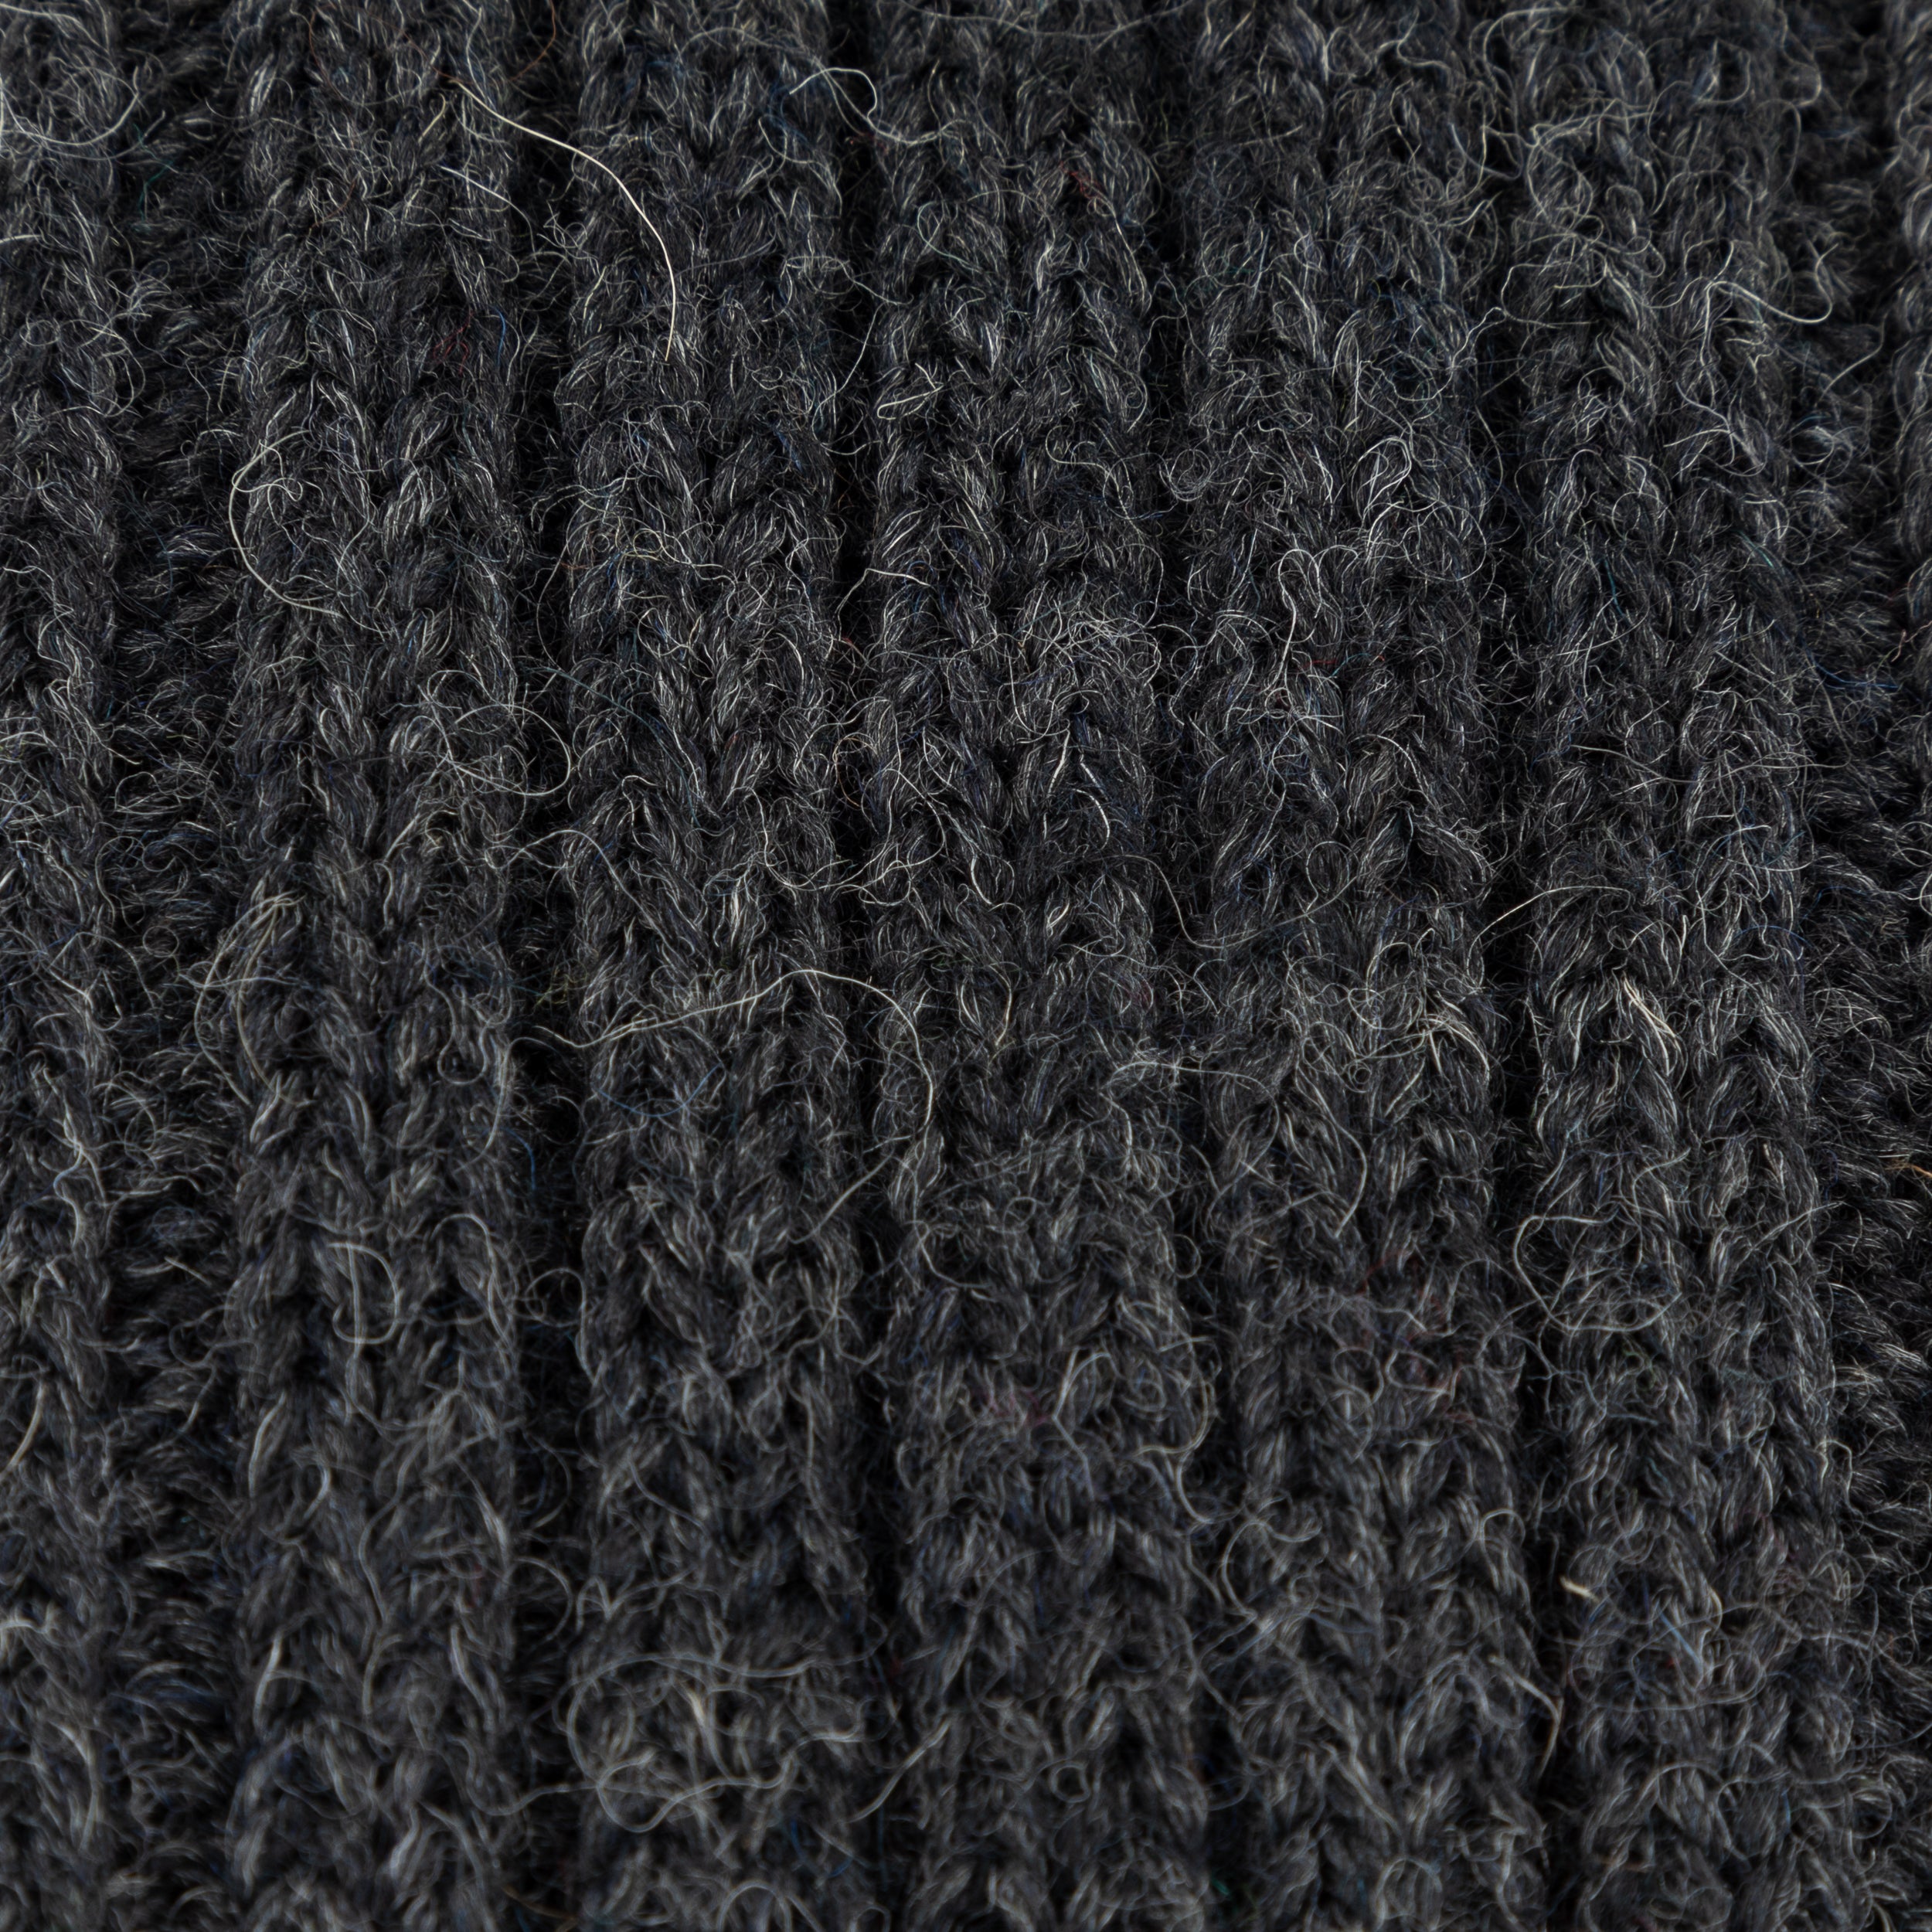 Carrier Company Wool Sock in Charcoal